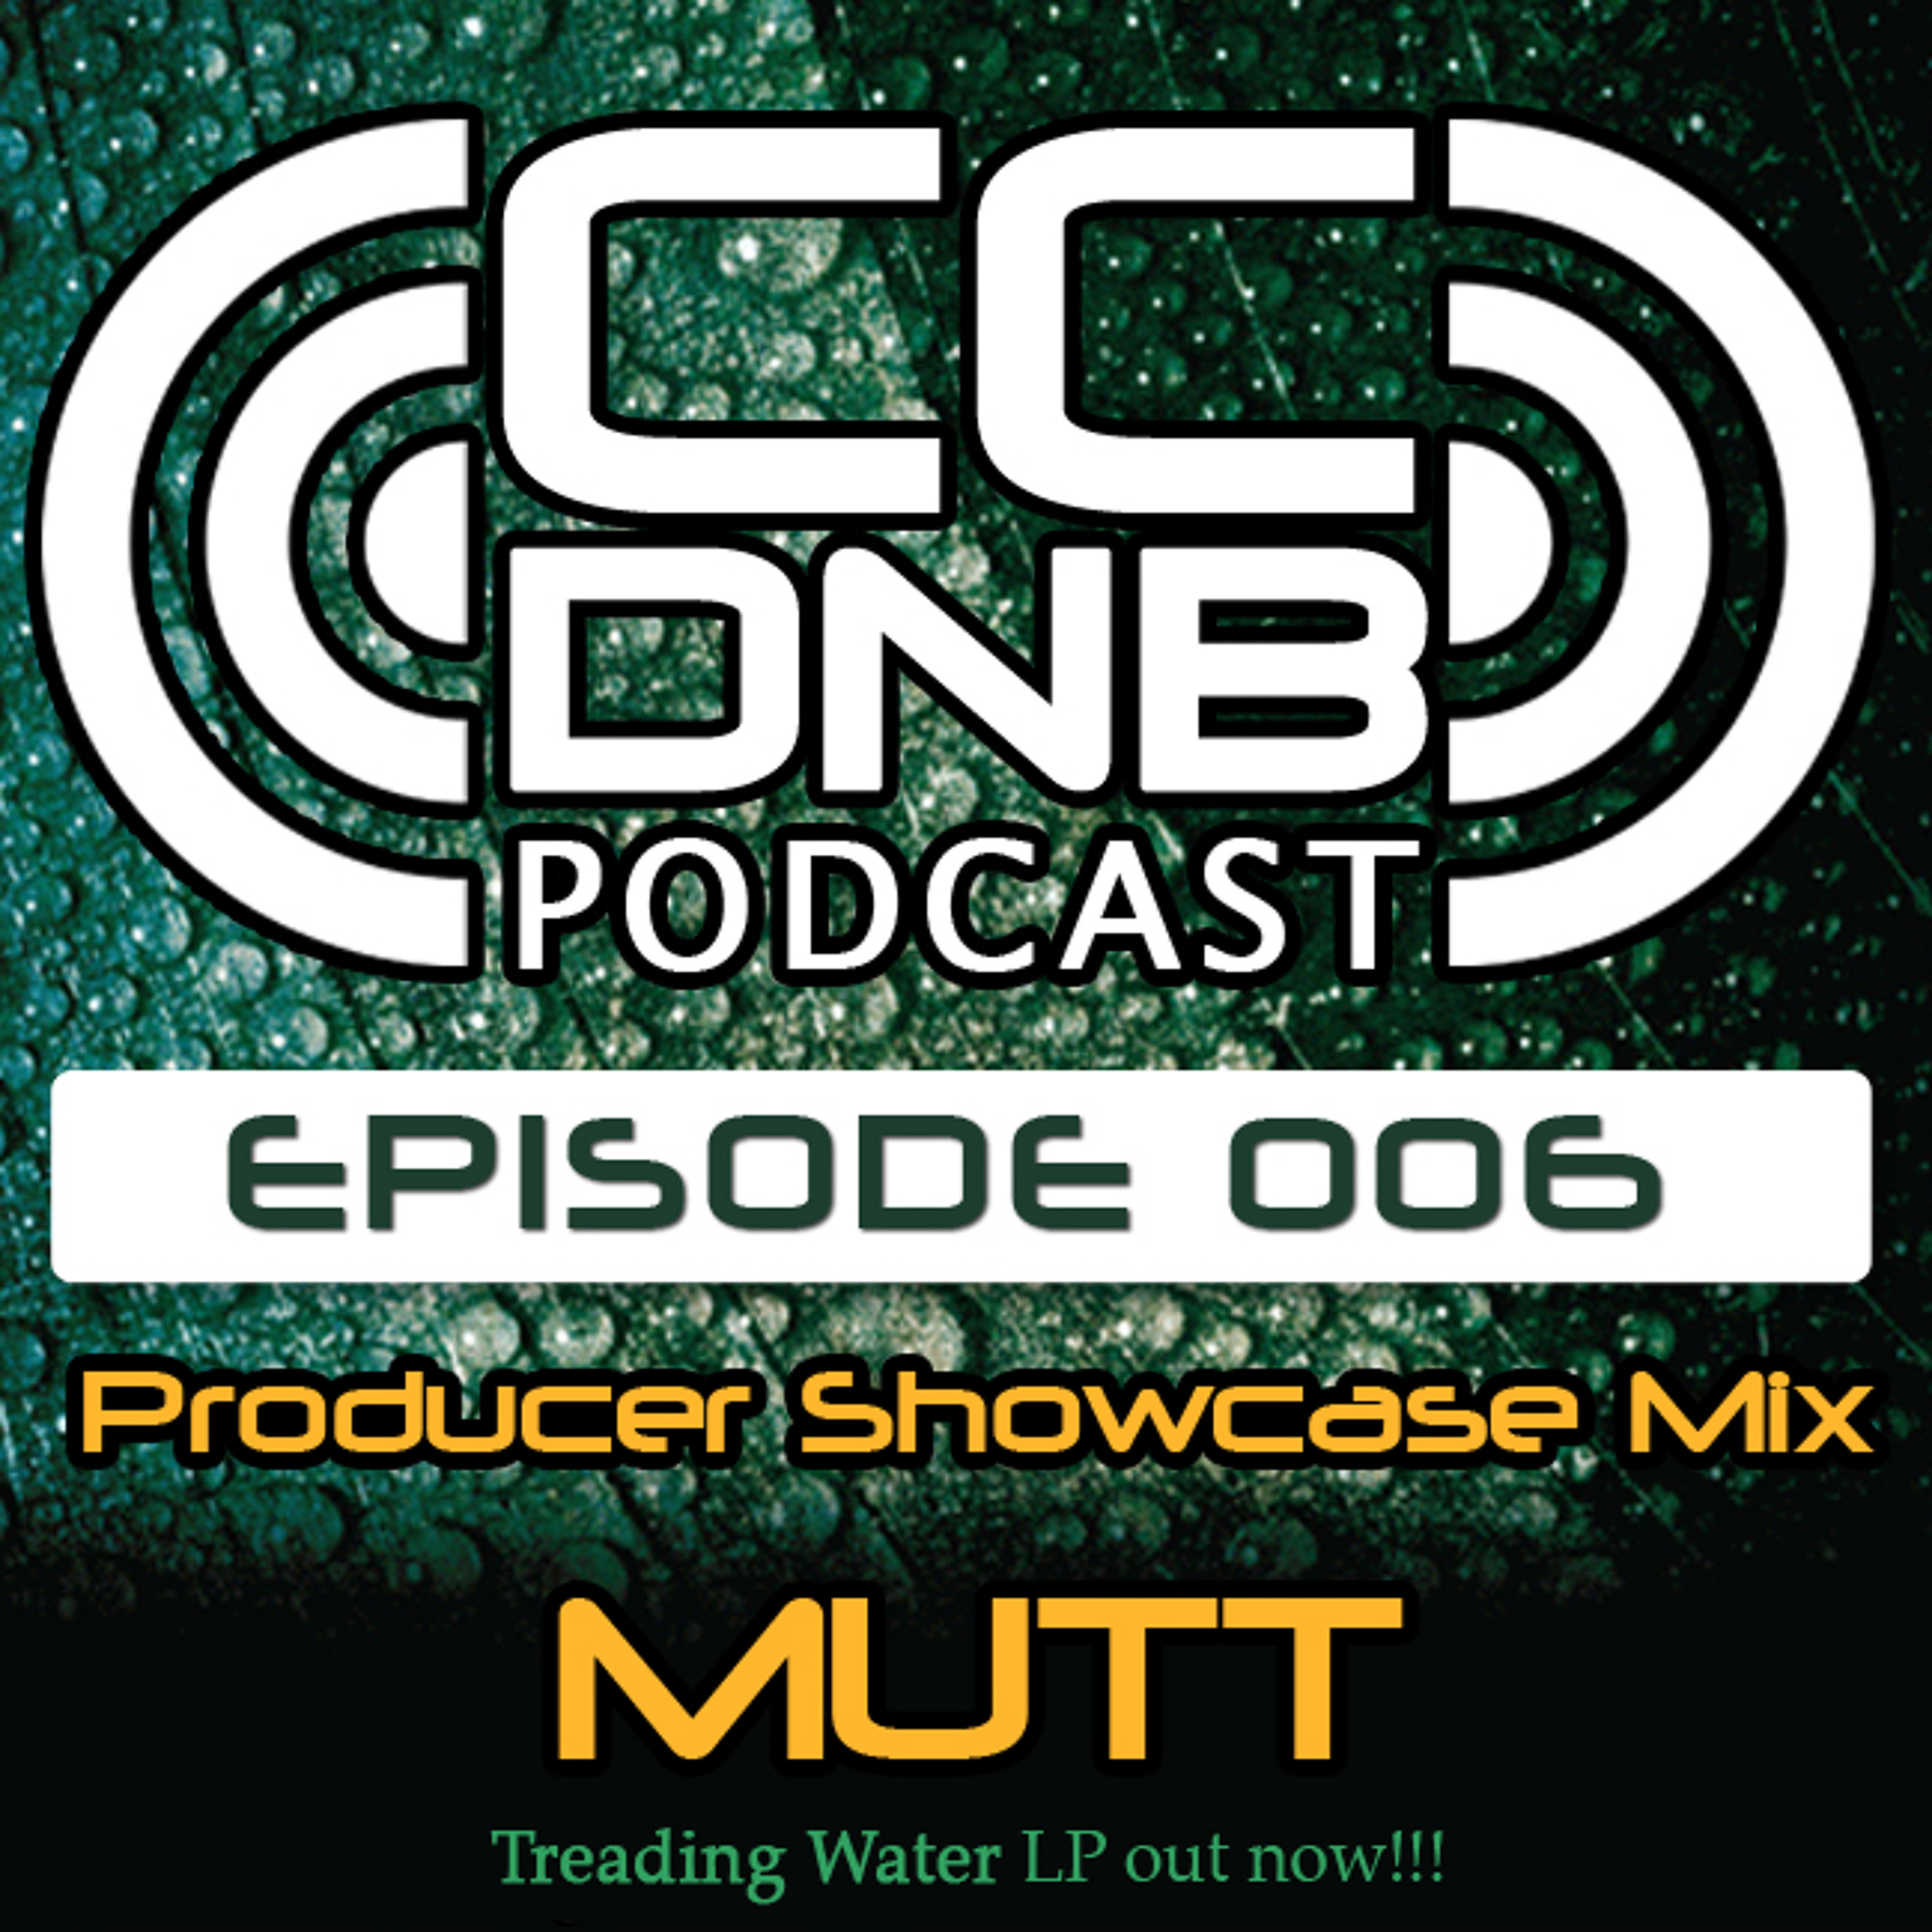 CCDNB 006 Producer showcase mix featuring Mutt